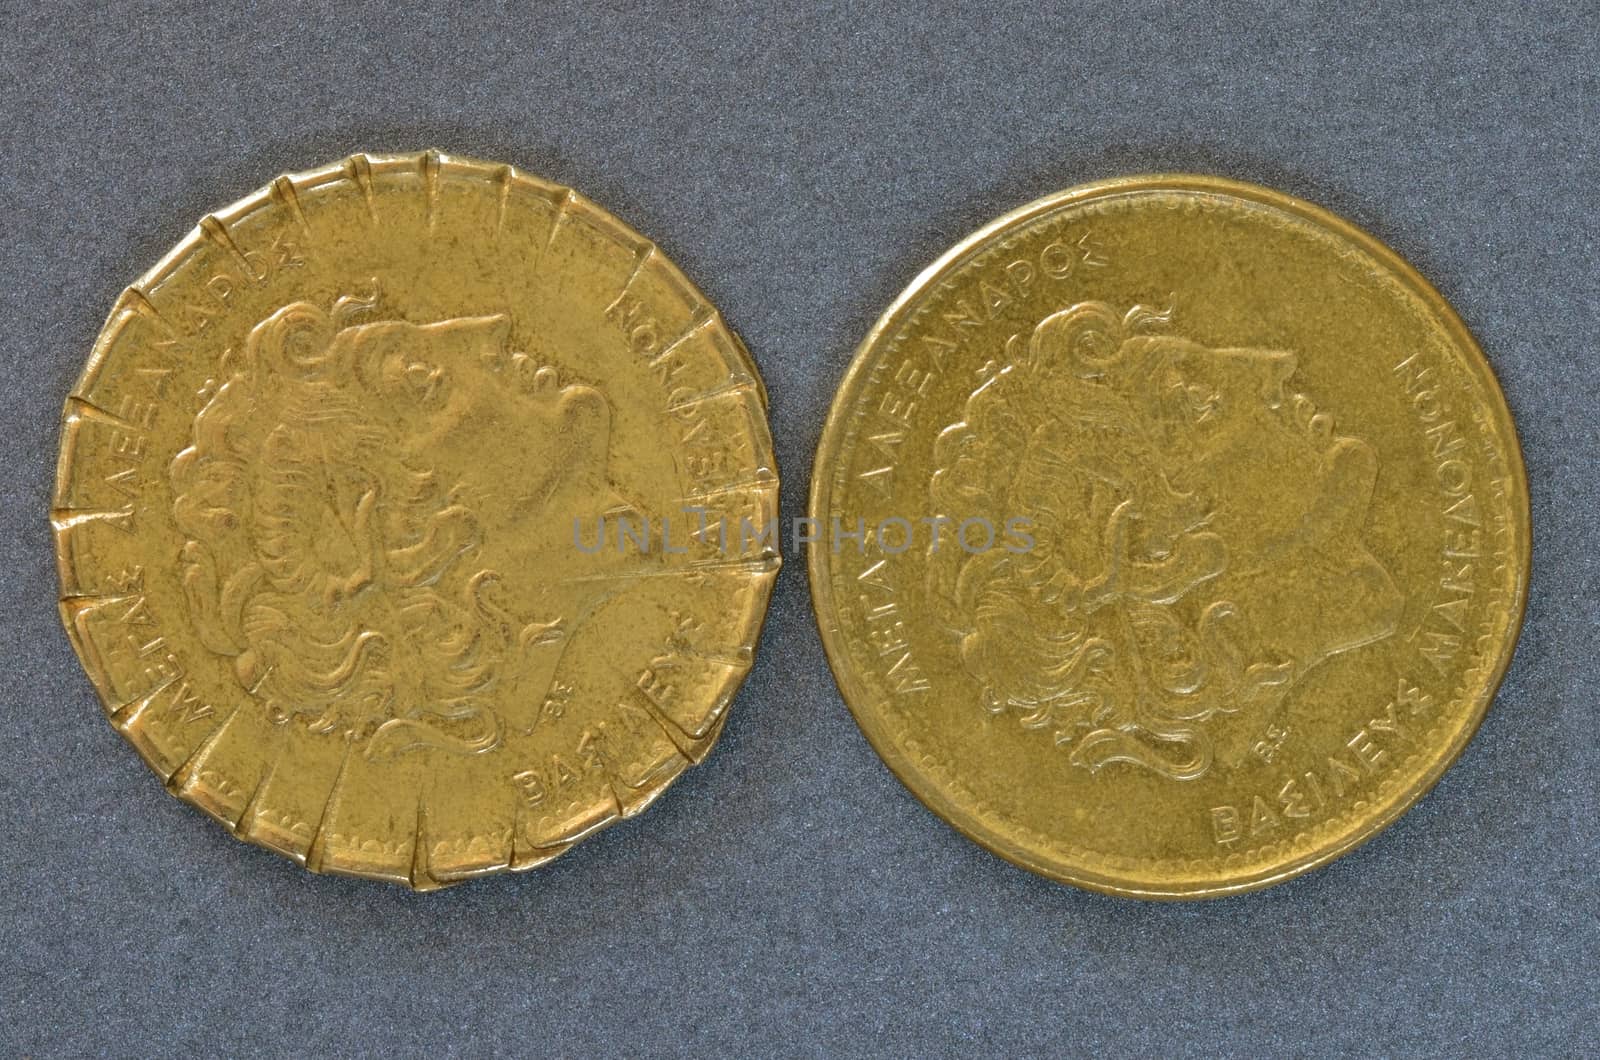 Two greek dirham coins with the same value. Old on the left side and newer redesigned on the right.